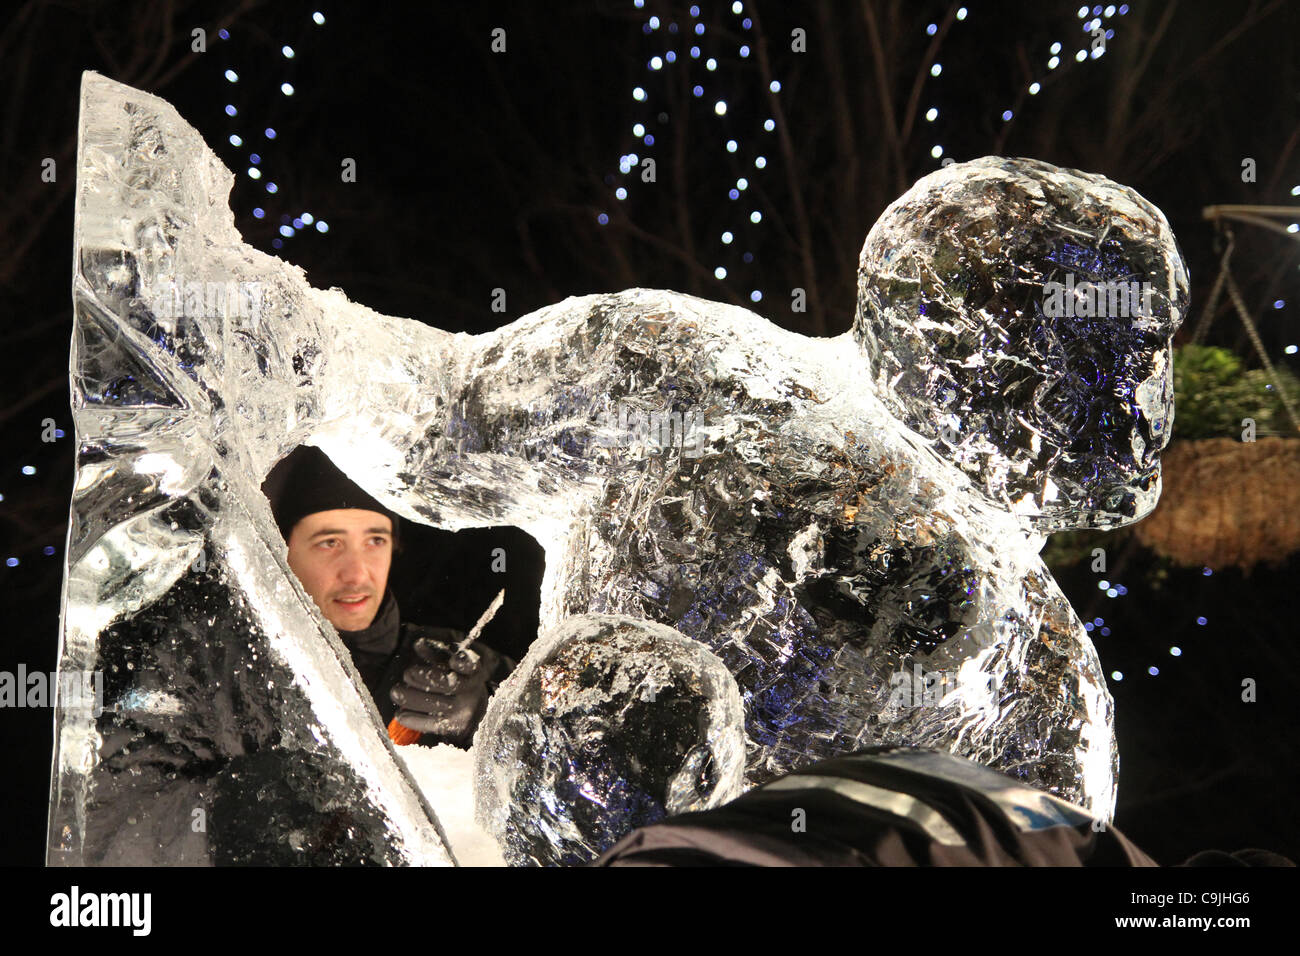 The Portuguese team composed of Pedro Mira & Niall Magee chisel on their  ice sculpture at the  4th annual London Ice Sculpting Festival at Canary Wharf Stock Photo